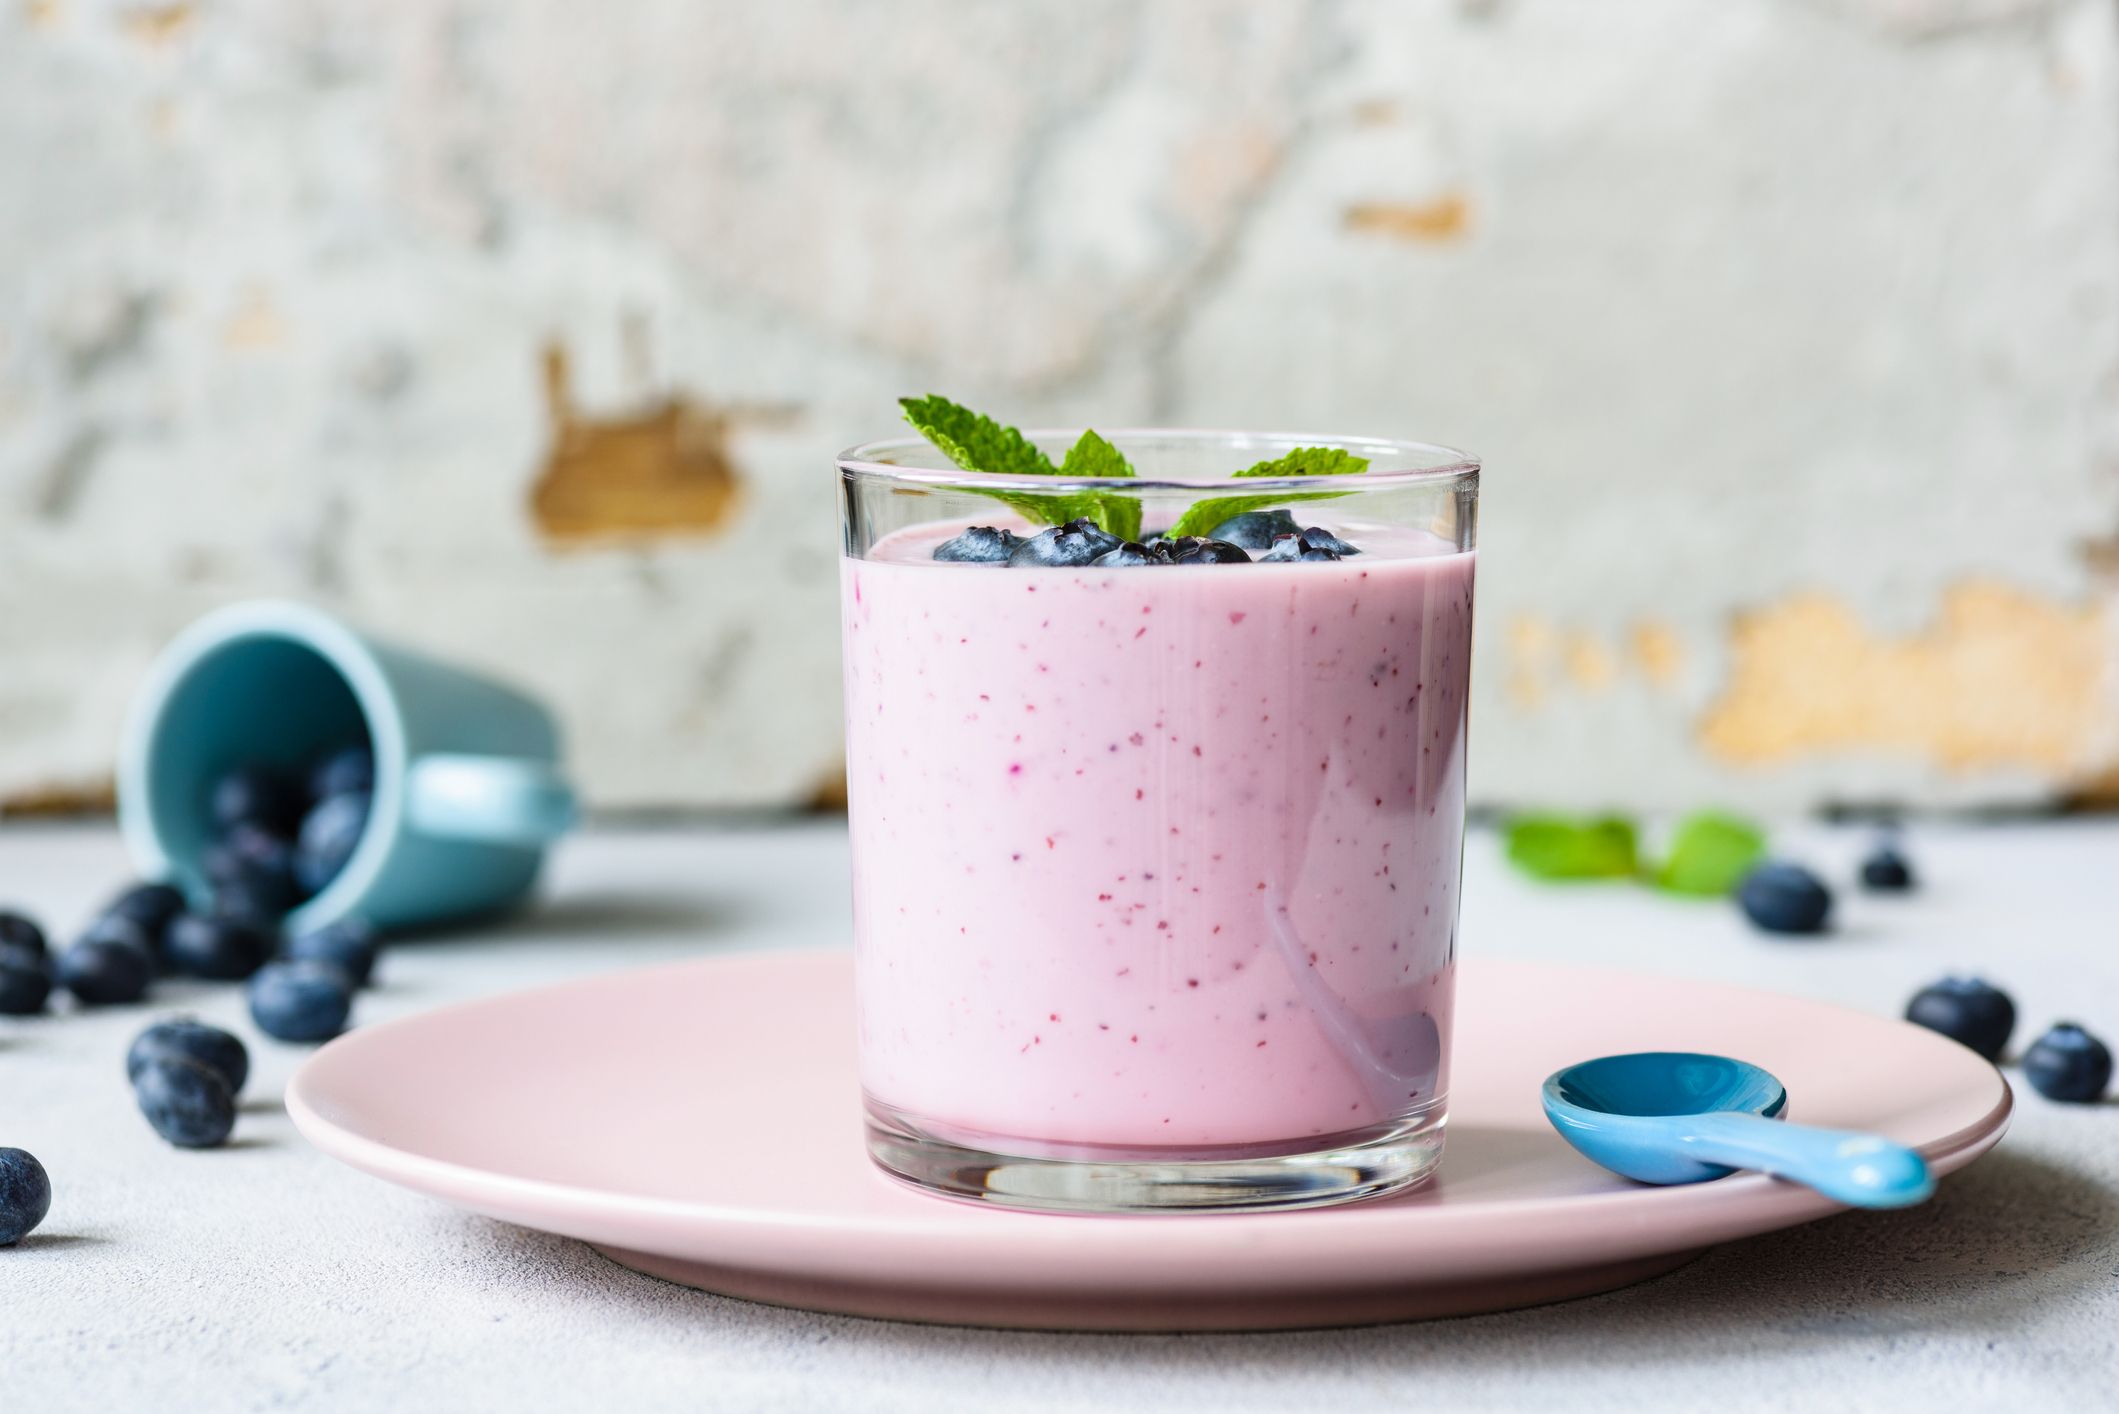 40 Best Healthy Smoothie Recipes For Weight Loss, From Dietitians